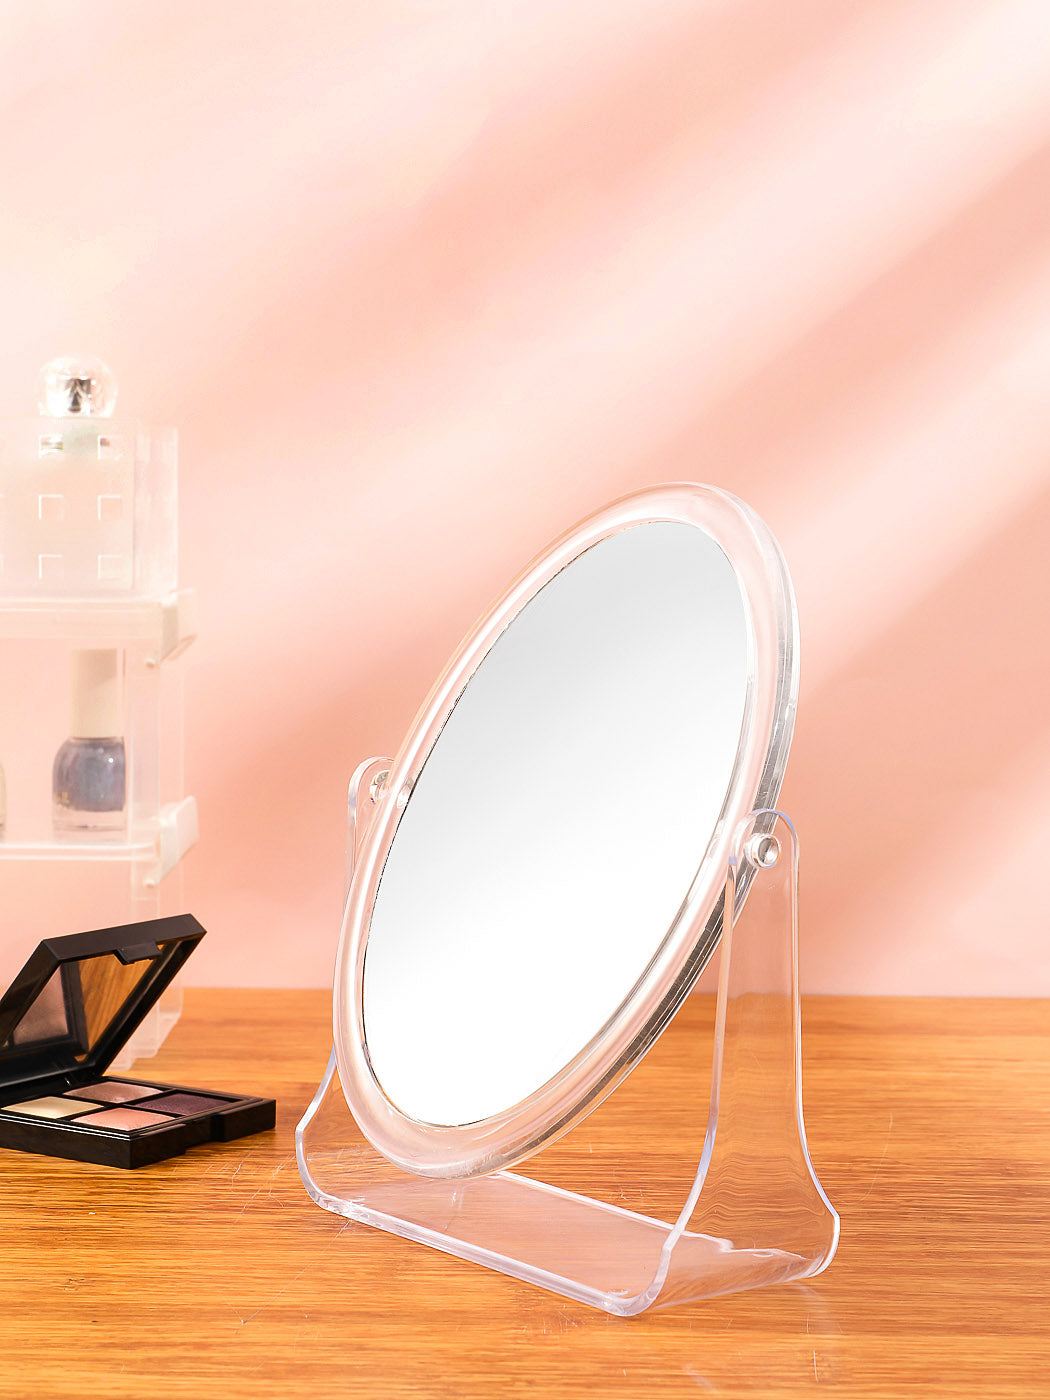 MINISO OVAL DOUBLE SIDED ROTATION VANITY MIRROR (2×MAGNIFICATION) 2010216810100 TABLE MIRROR-2